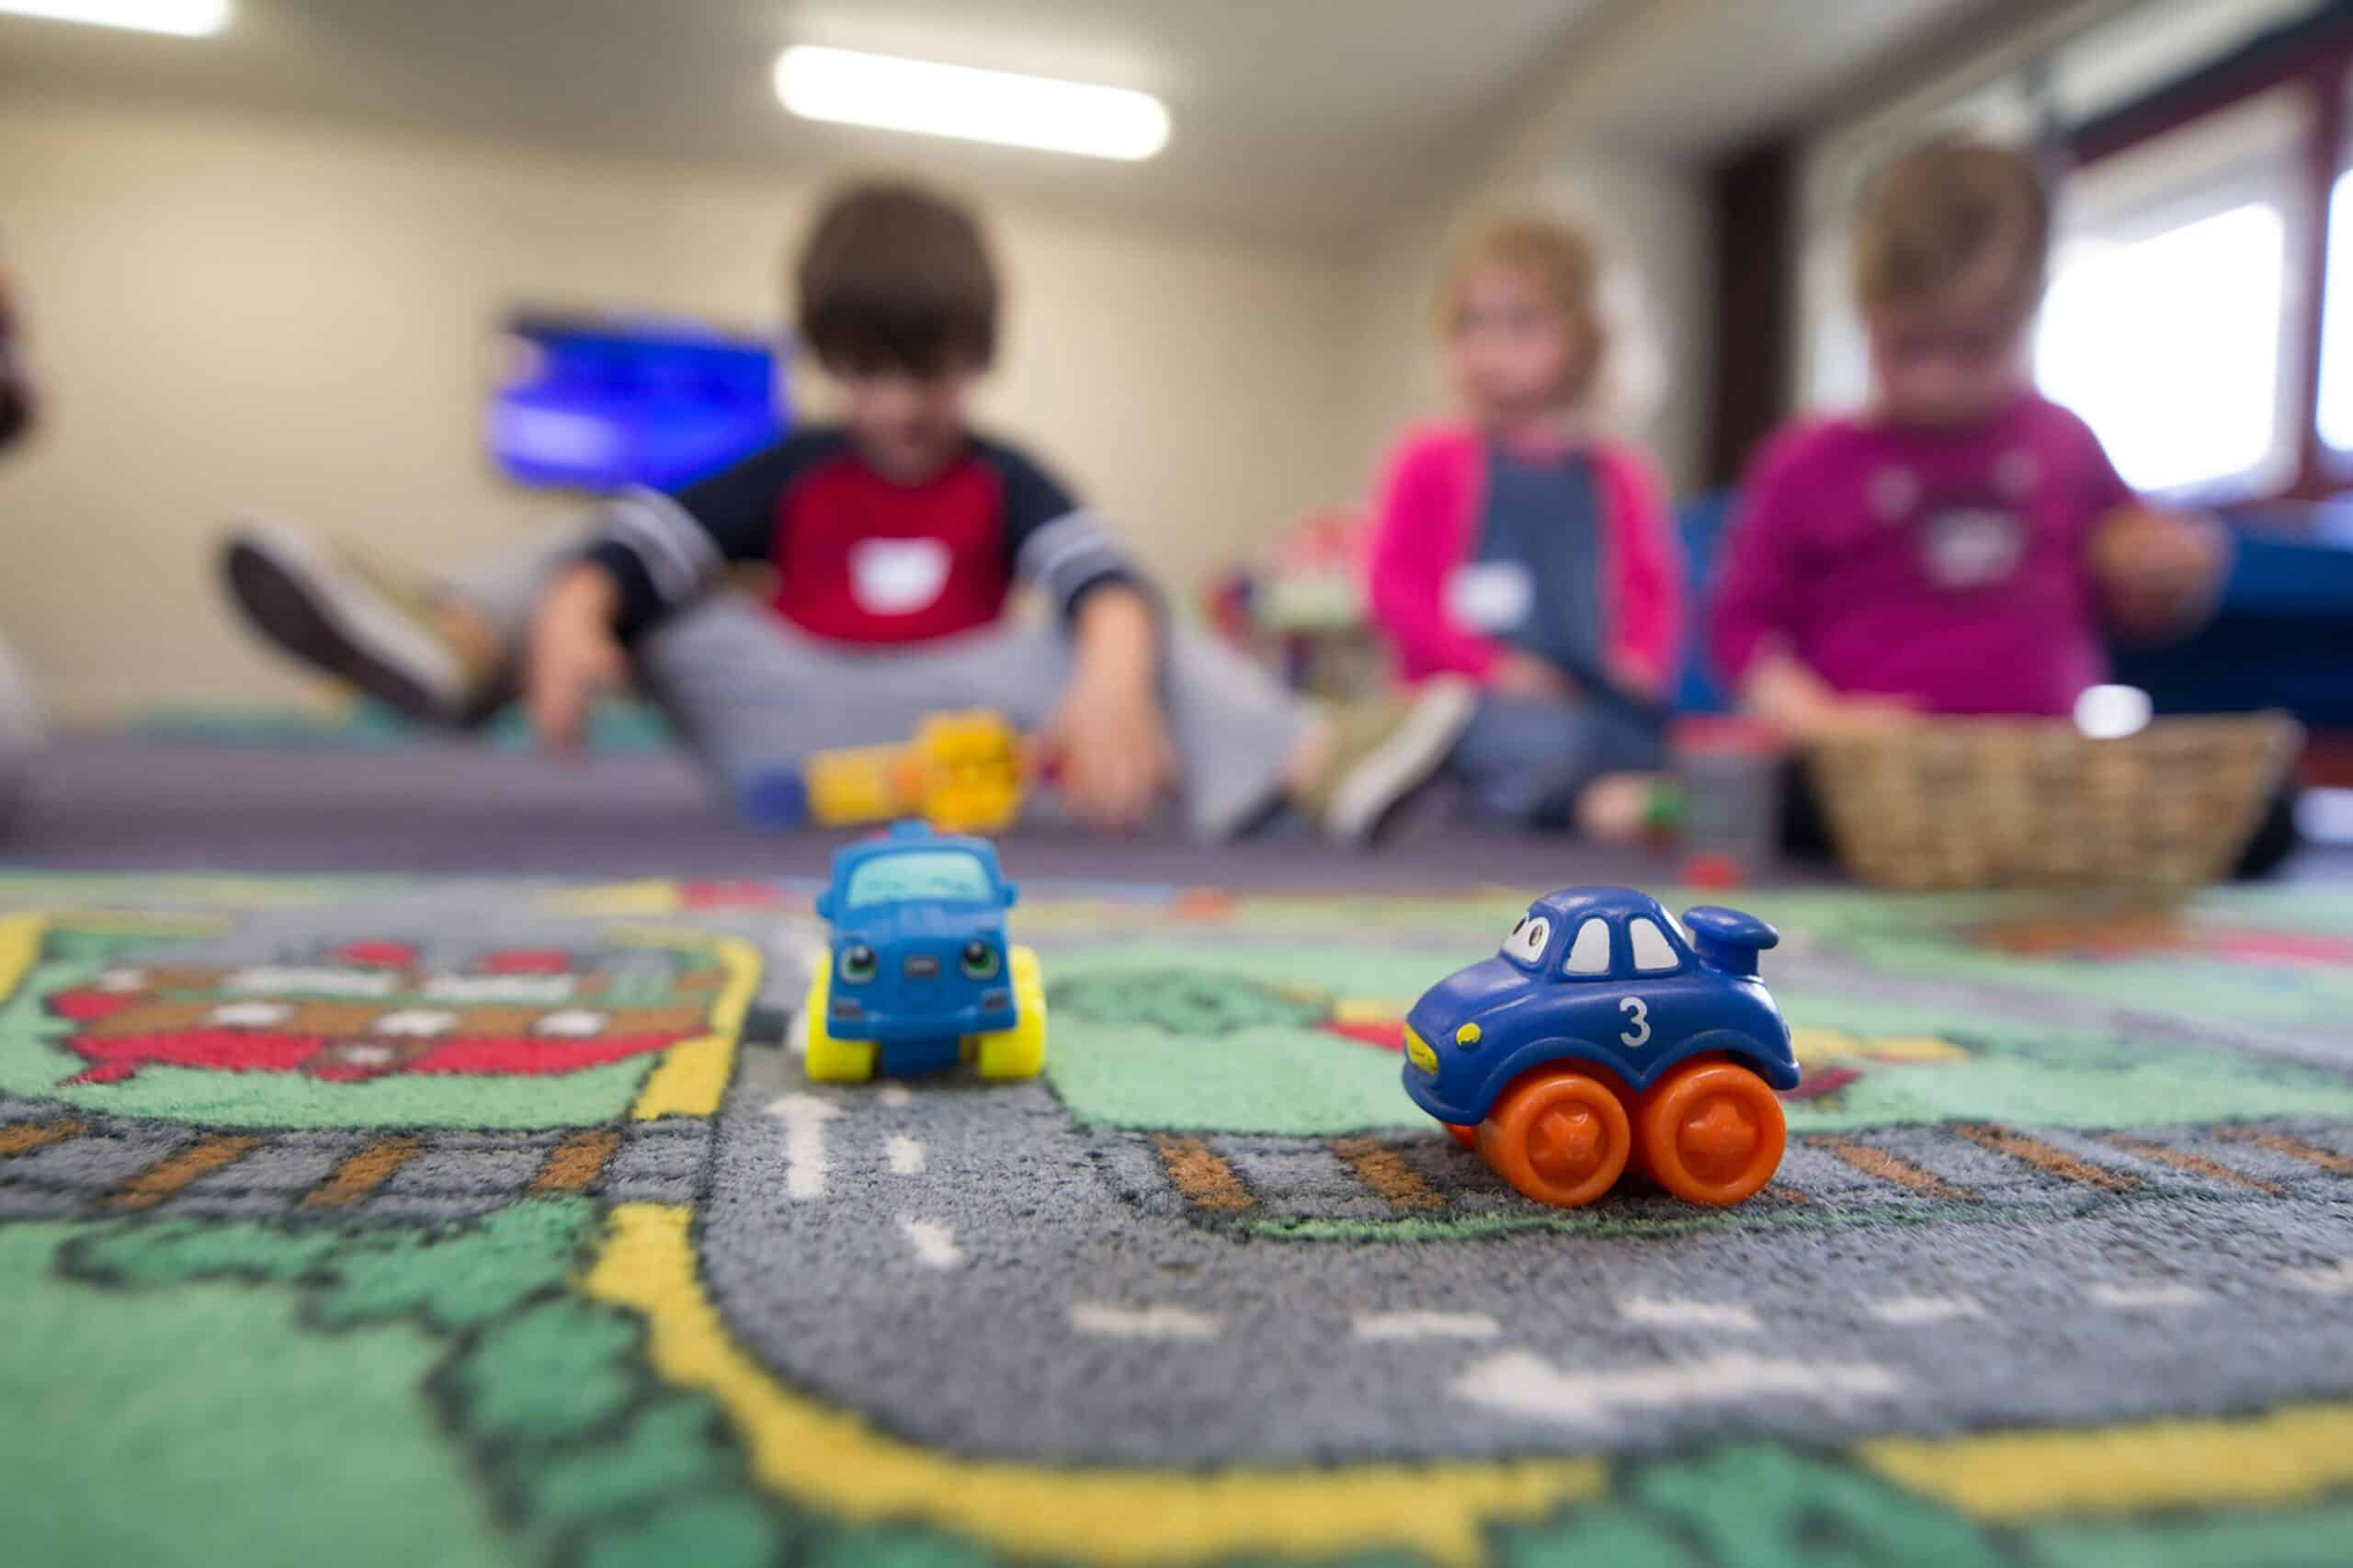 kids playing with toy cars on a toy road mat